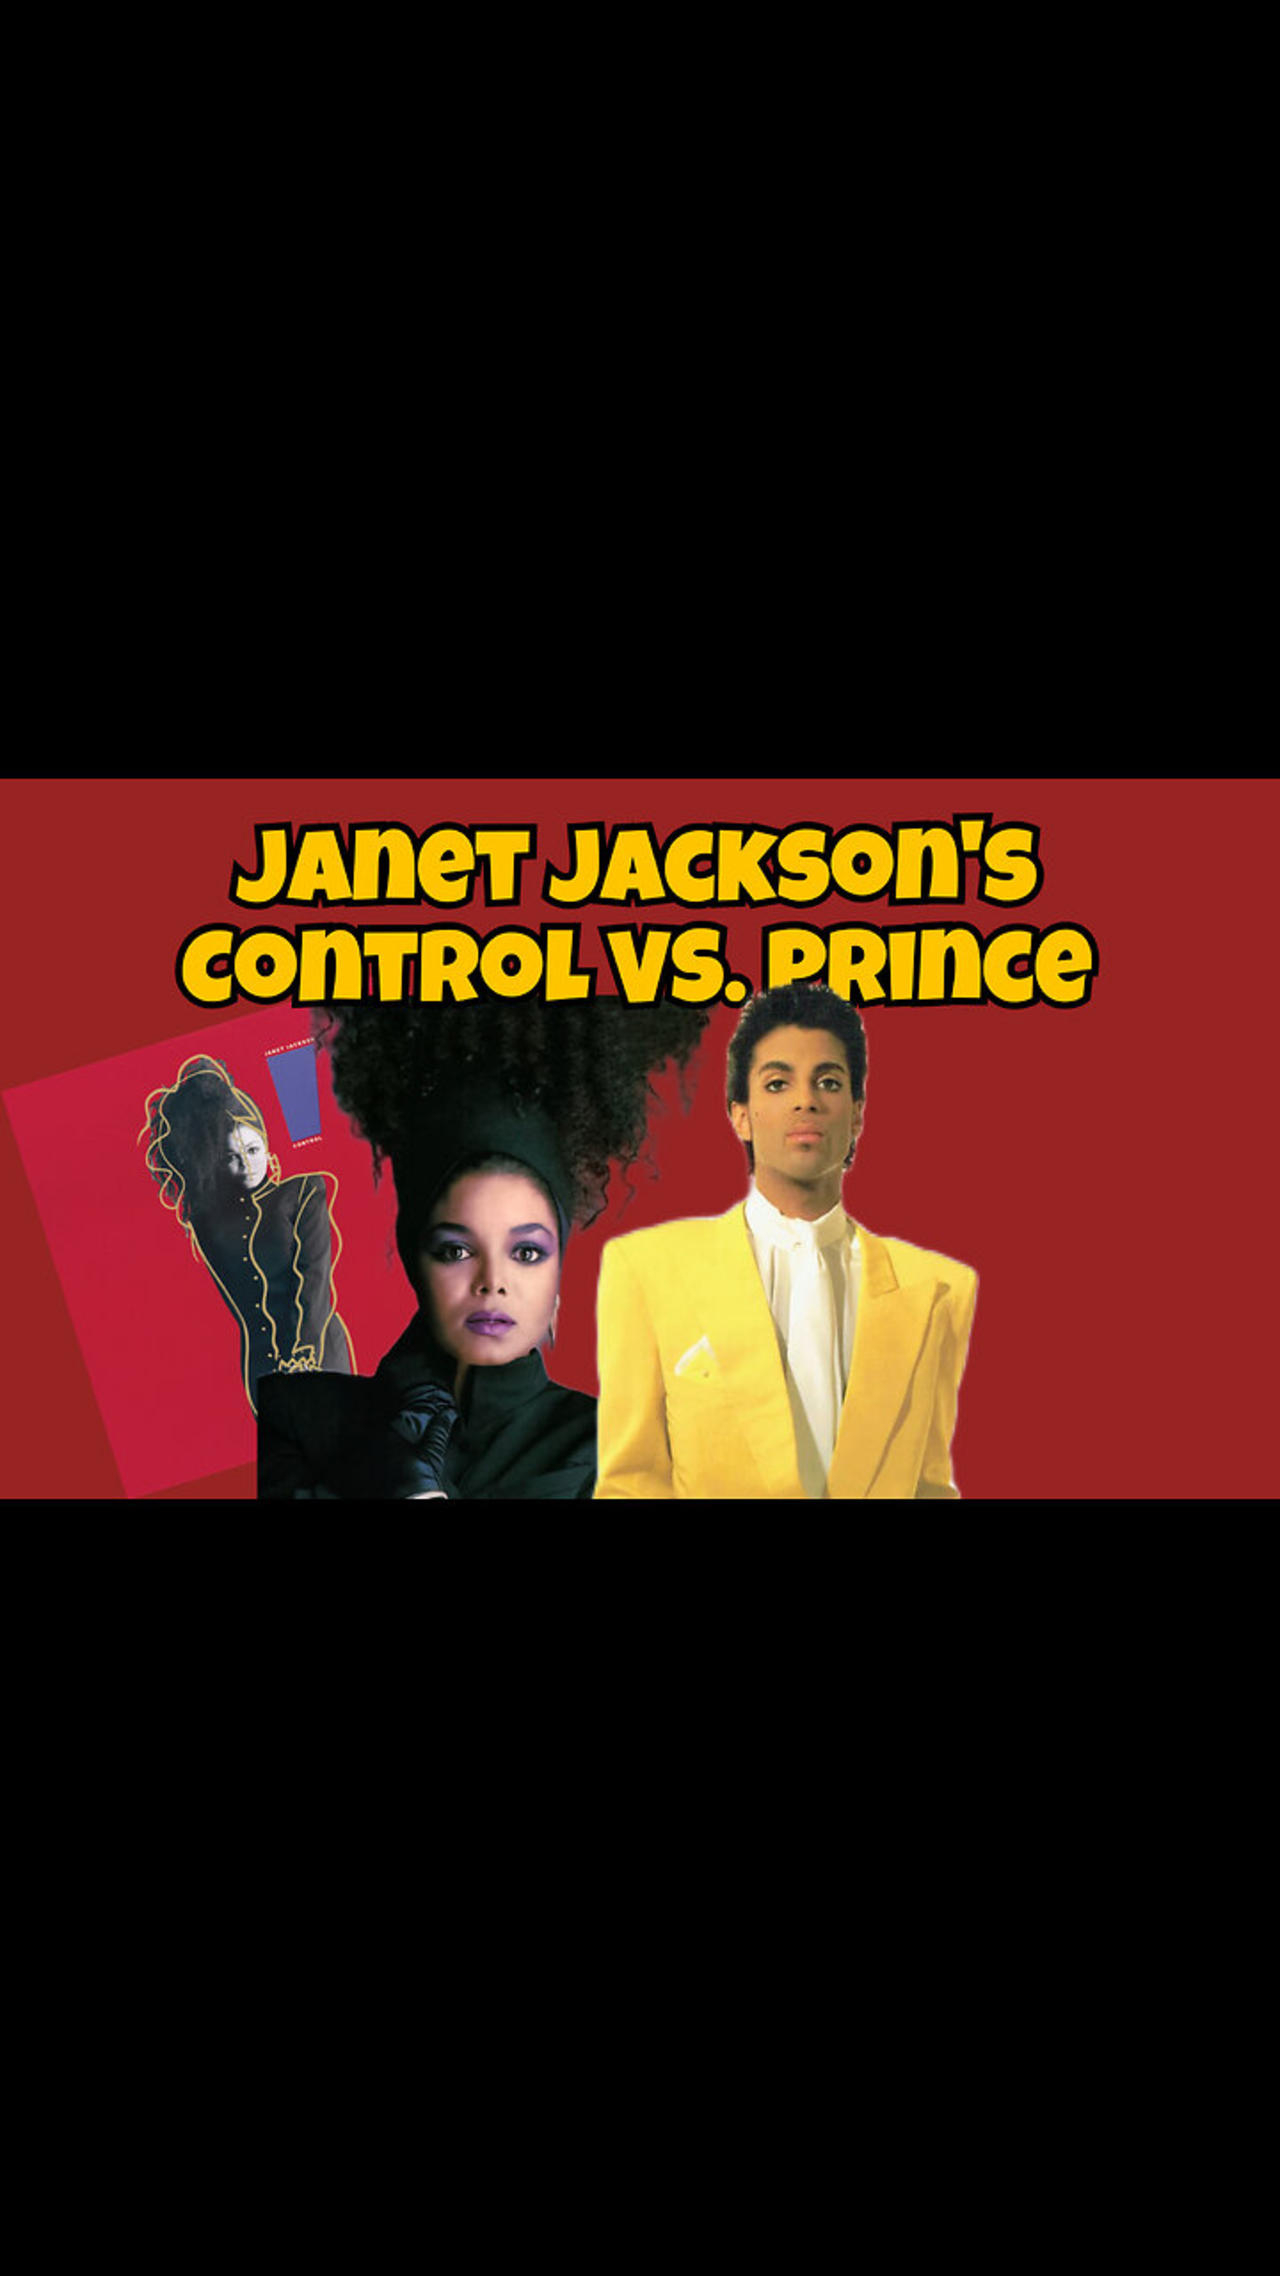 Jimmy Jam felt Prince insulted him because he threw Janet Jackson’s Control CD out the window